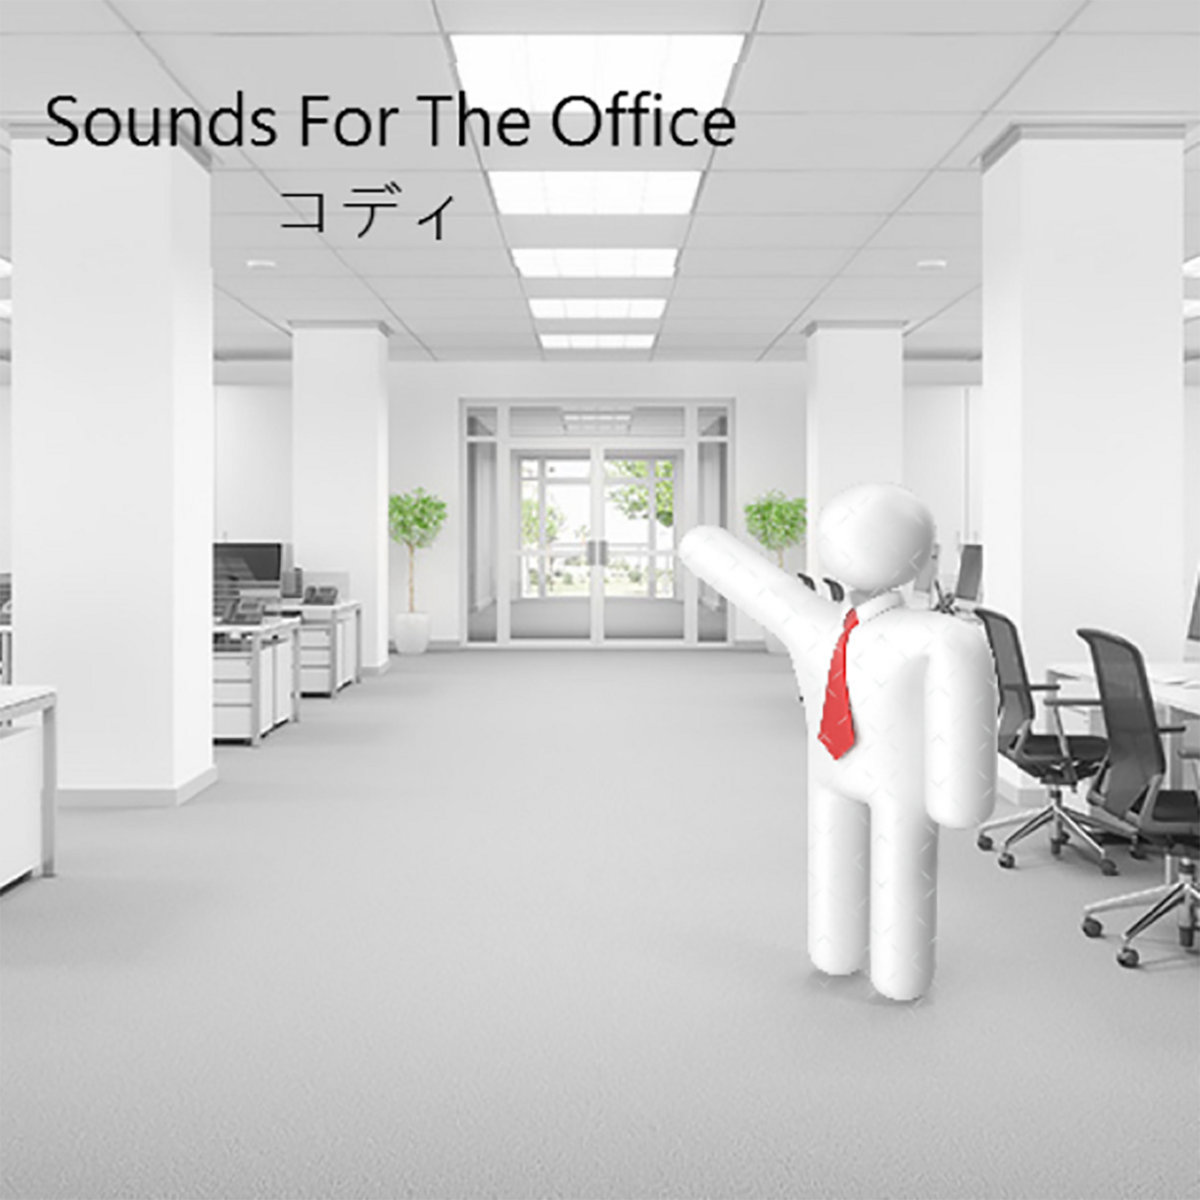 Sounds For the Office by コディ (Kody)